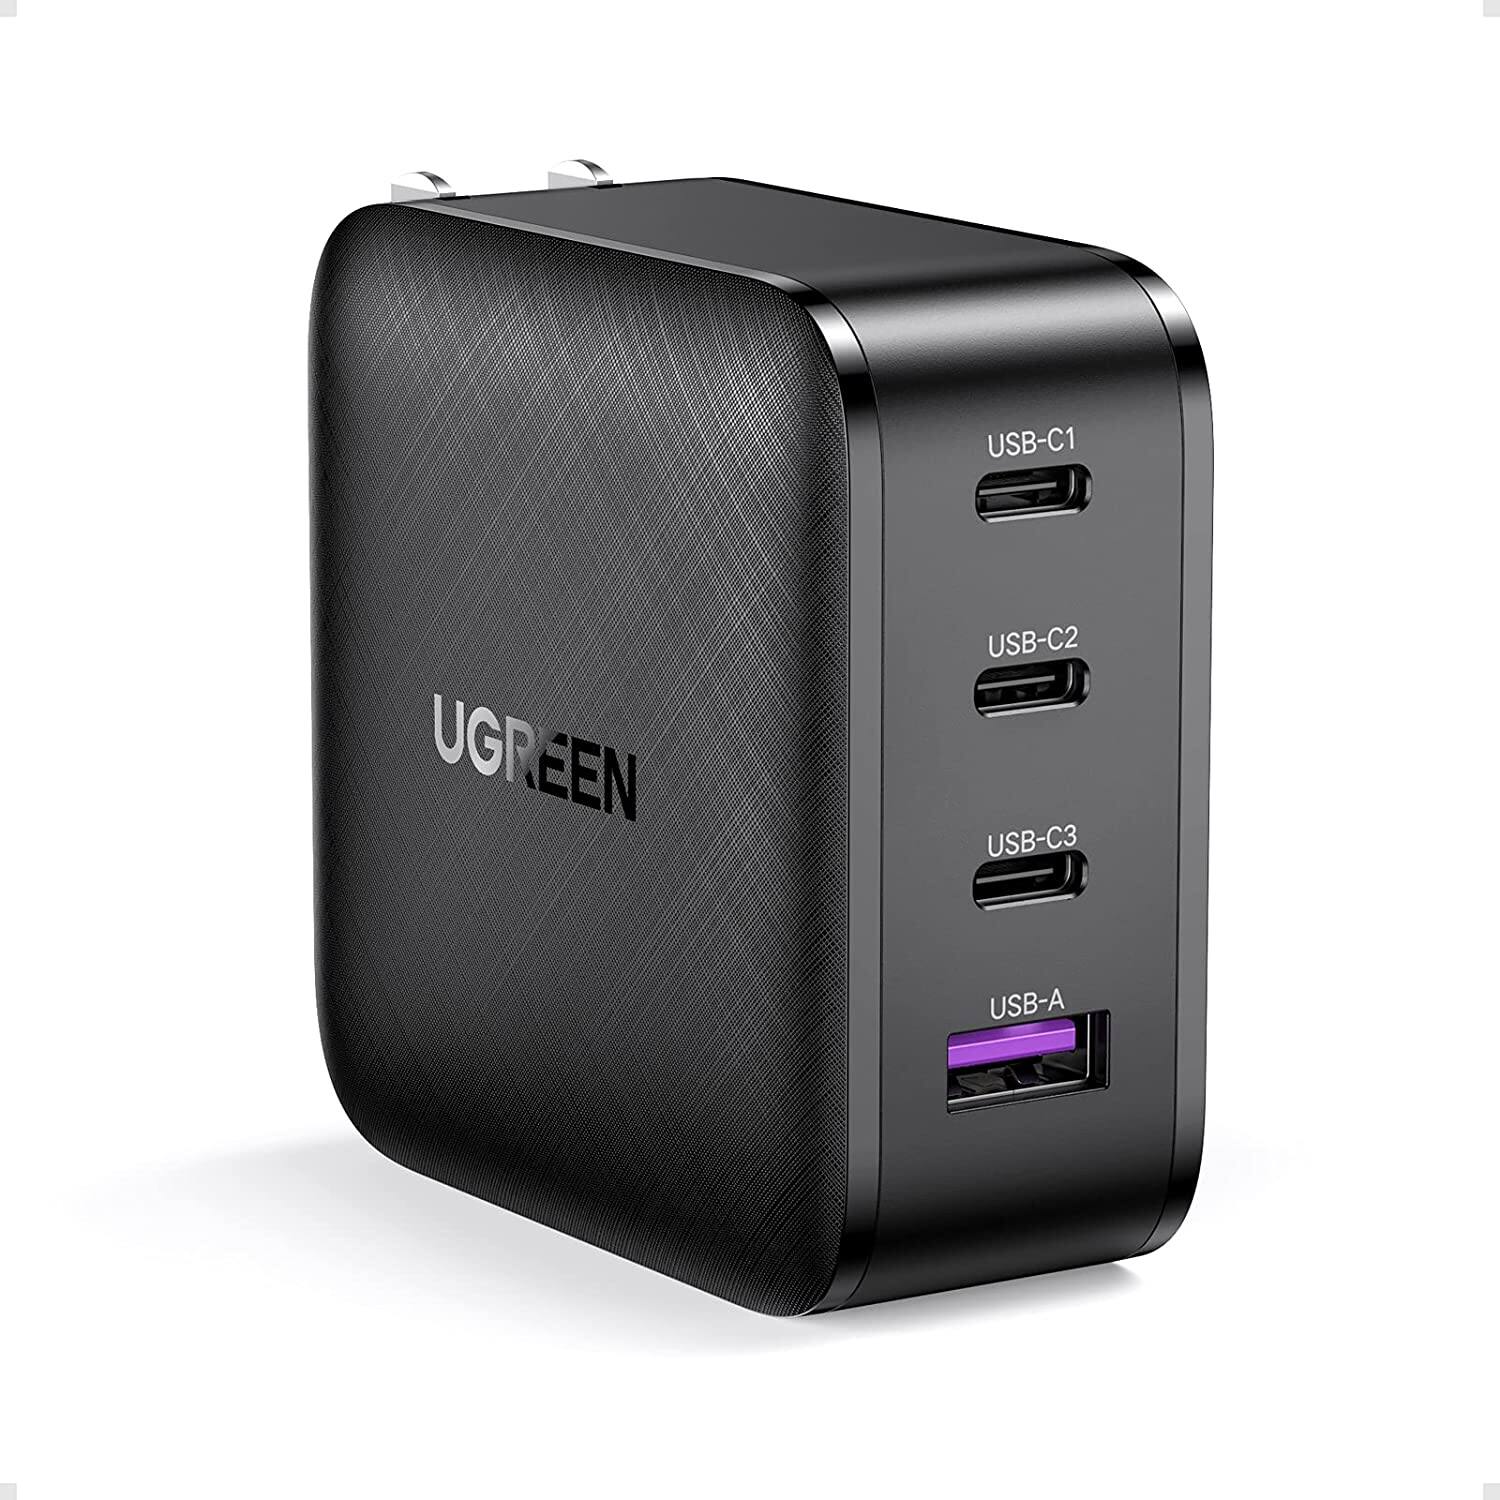 UGREEN 3c1a GaN Charger 65W $24.30 and more + Free Shipping w/ Prime or $25+